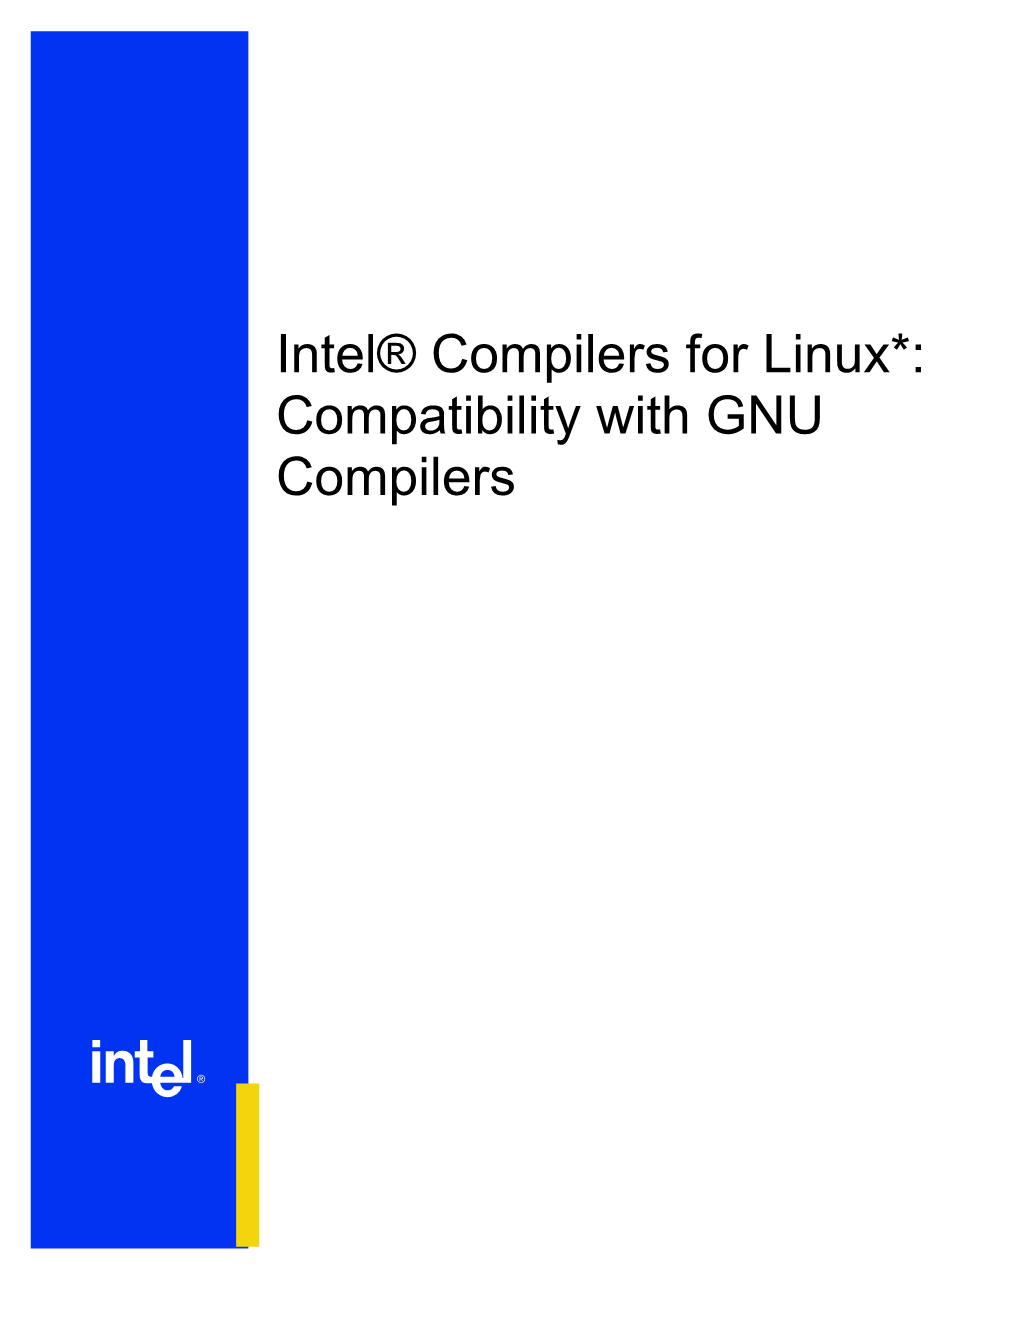 Intel® Compilers for Linux*: Compatibility with GNU Compilers